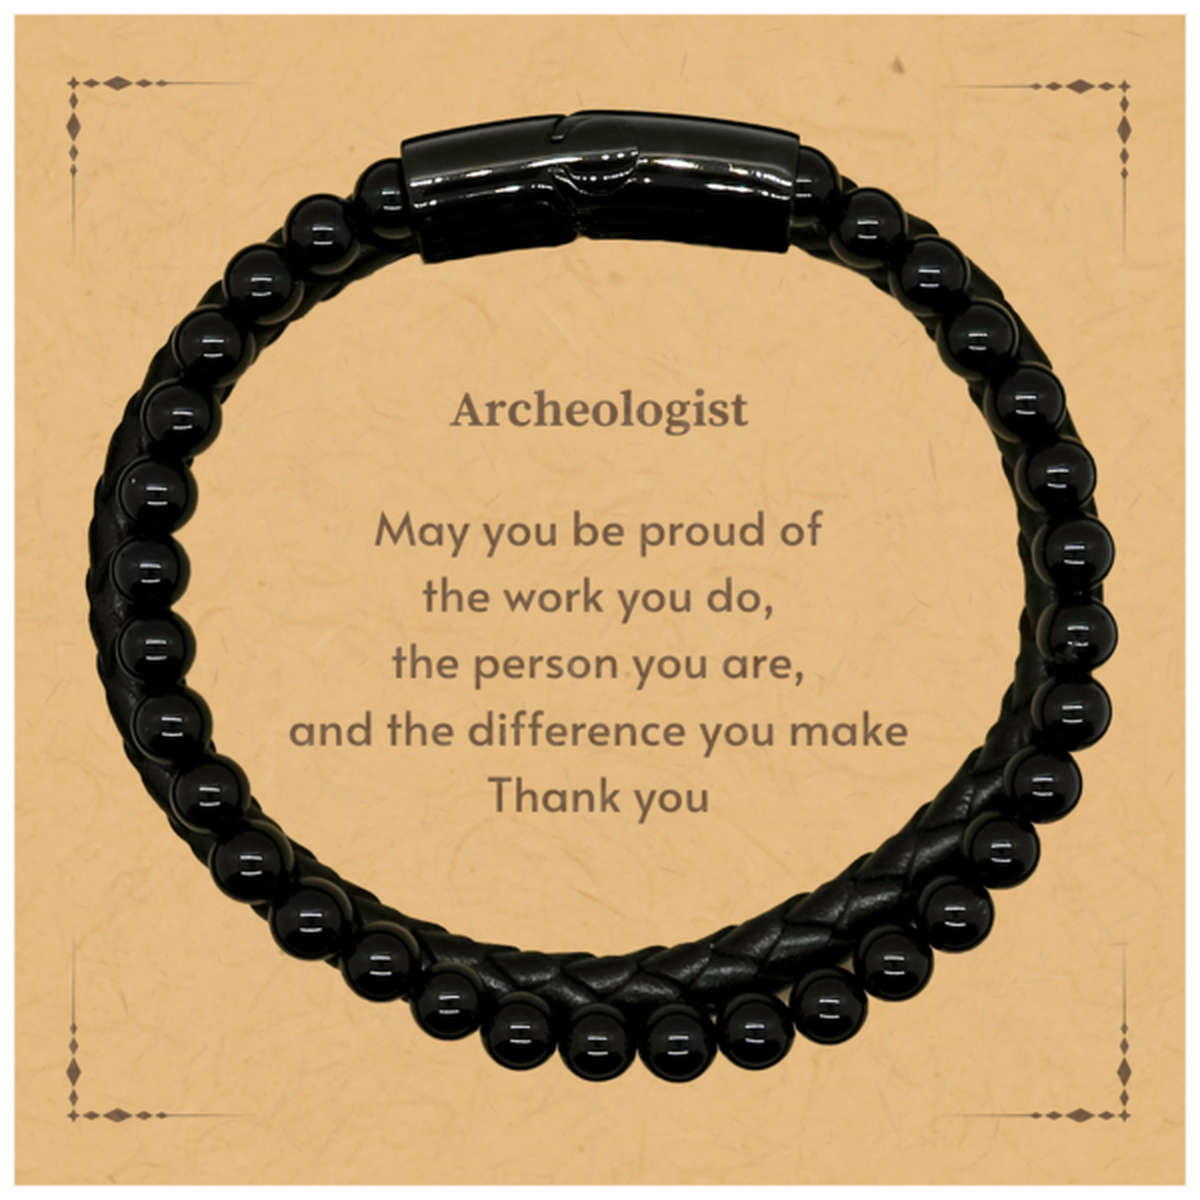 Heartwarming Stone Leather Bracelets Retirement Coworkers Gifts for Archeologist, Archeologist May You be proud of the work you do, the person you are Gifts for Boss Men Women Friends